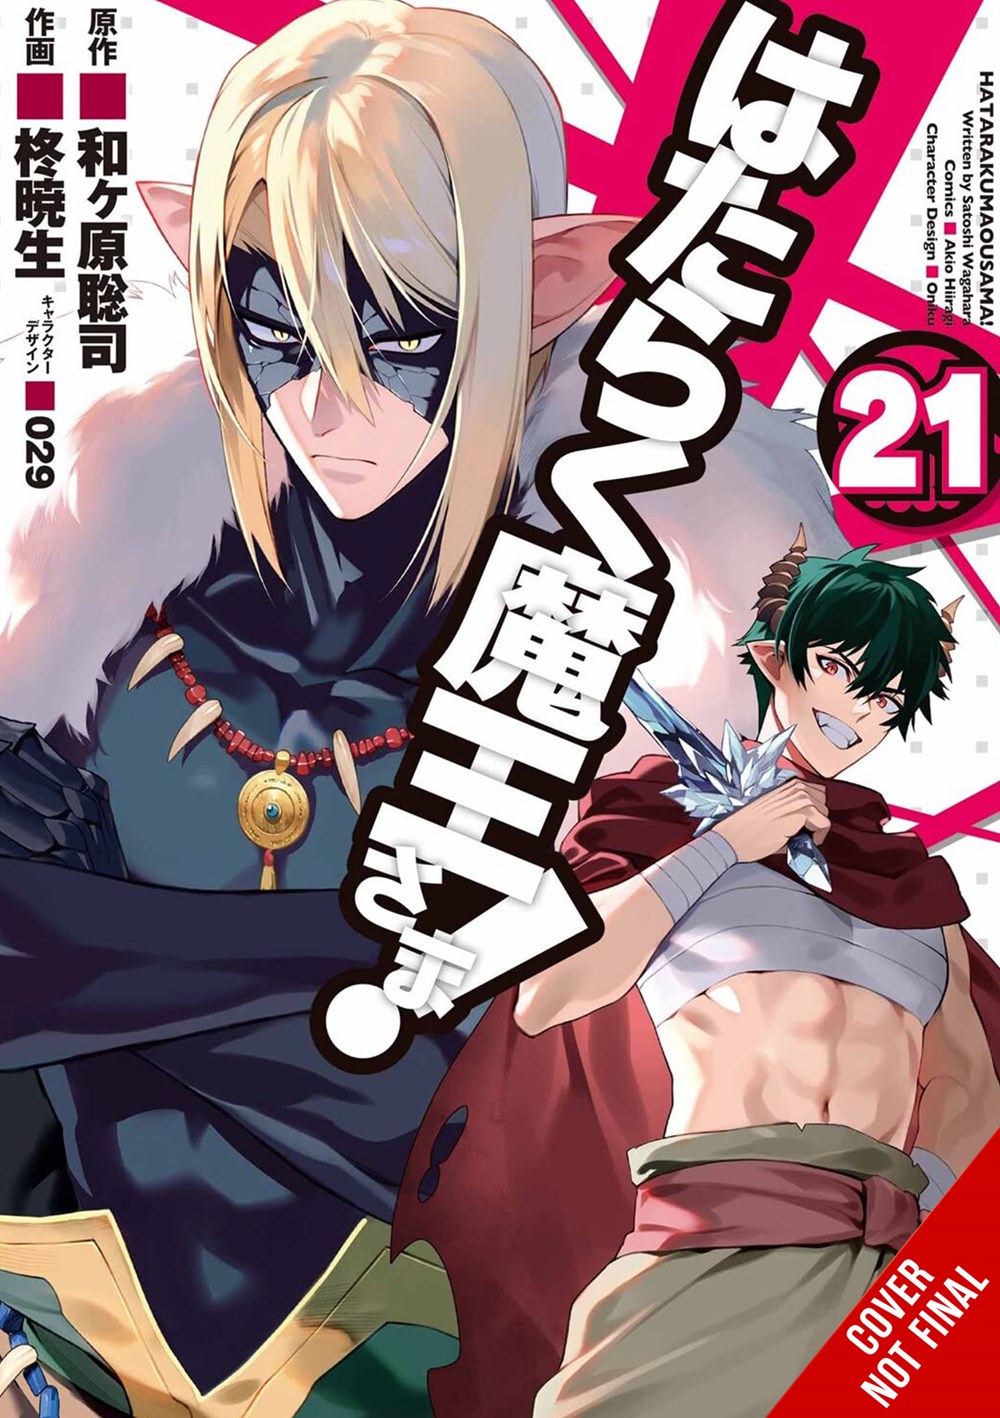 The Devil is a Part-Timer Manga Volume 21 image count 0